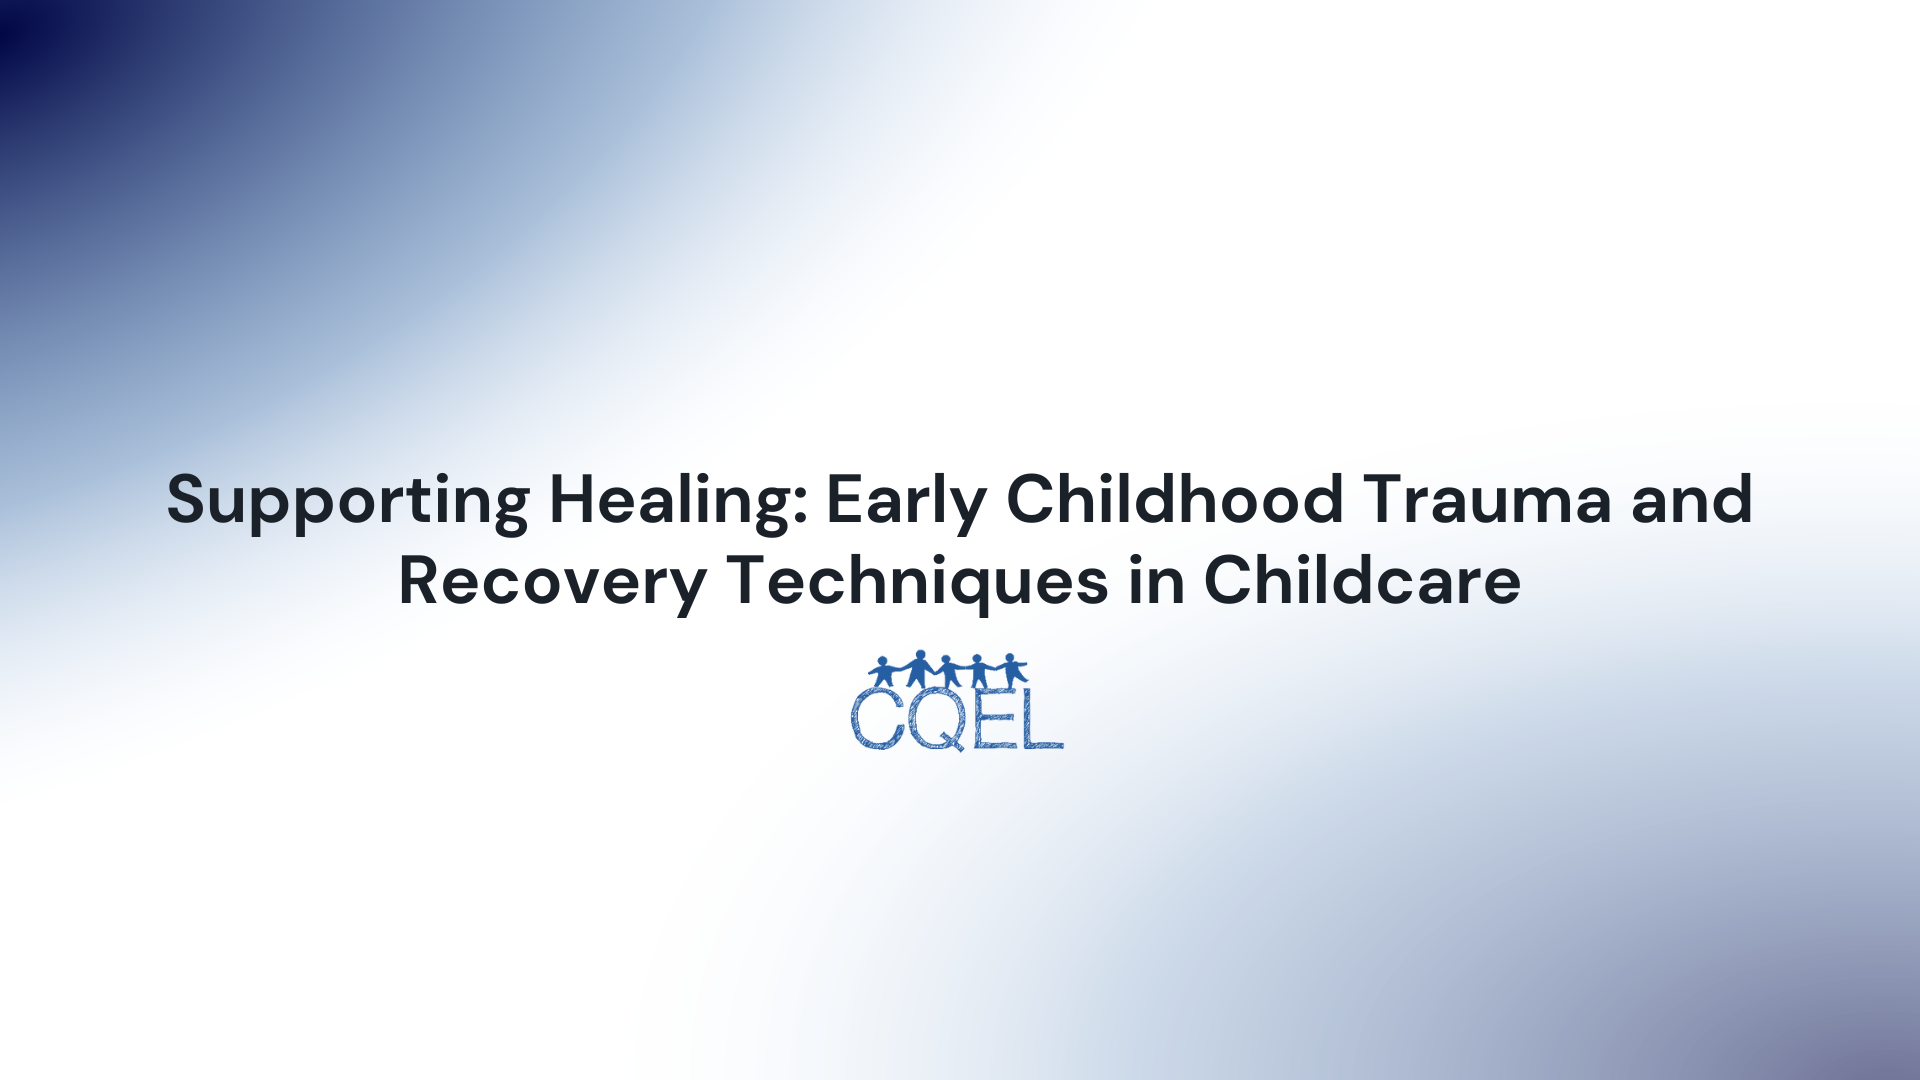 Supporting Healing: Early Childhood Trauma and Recovery Techniques in Childcare